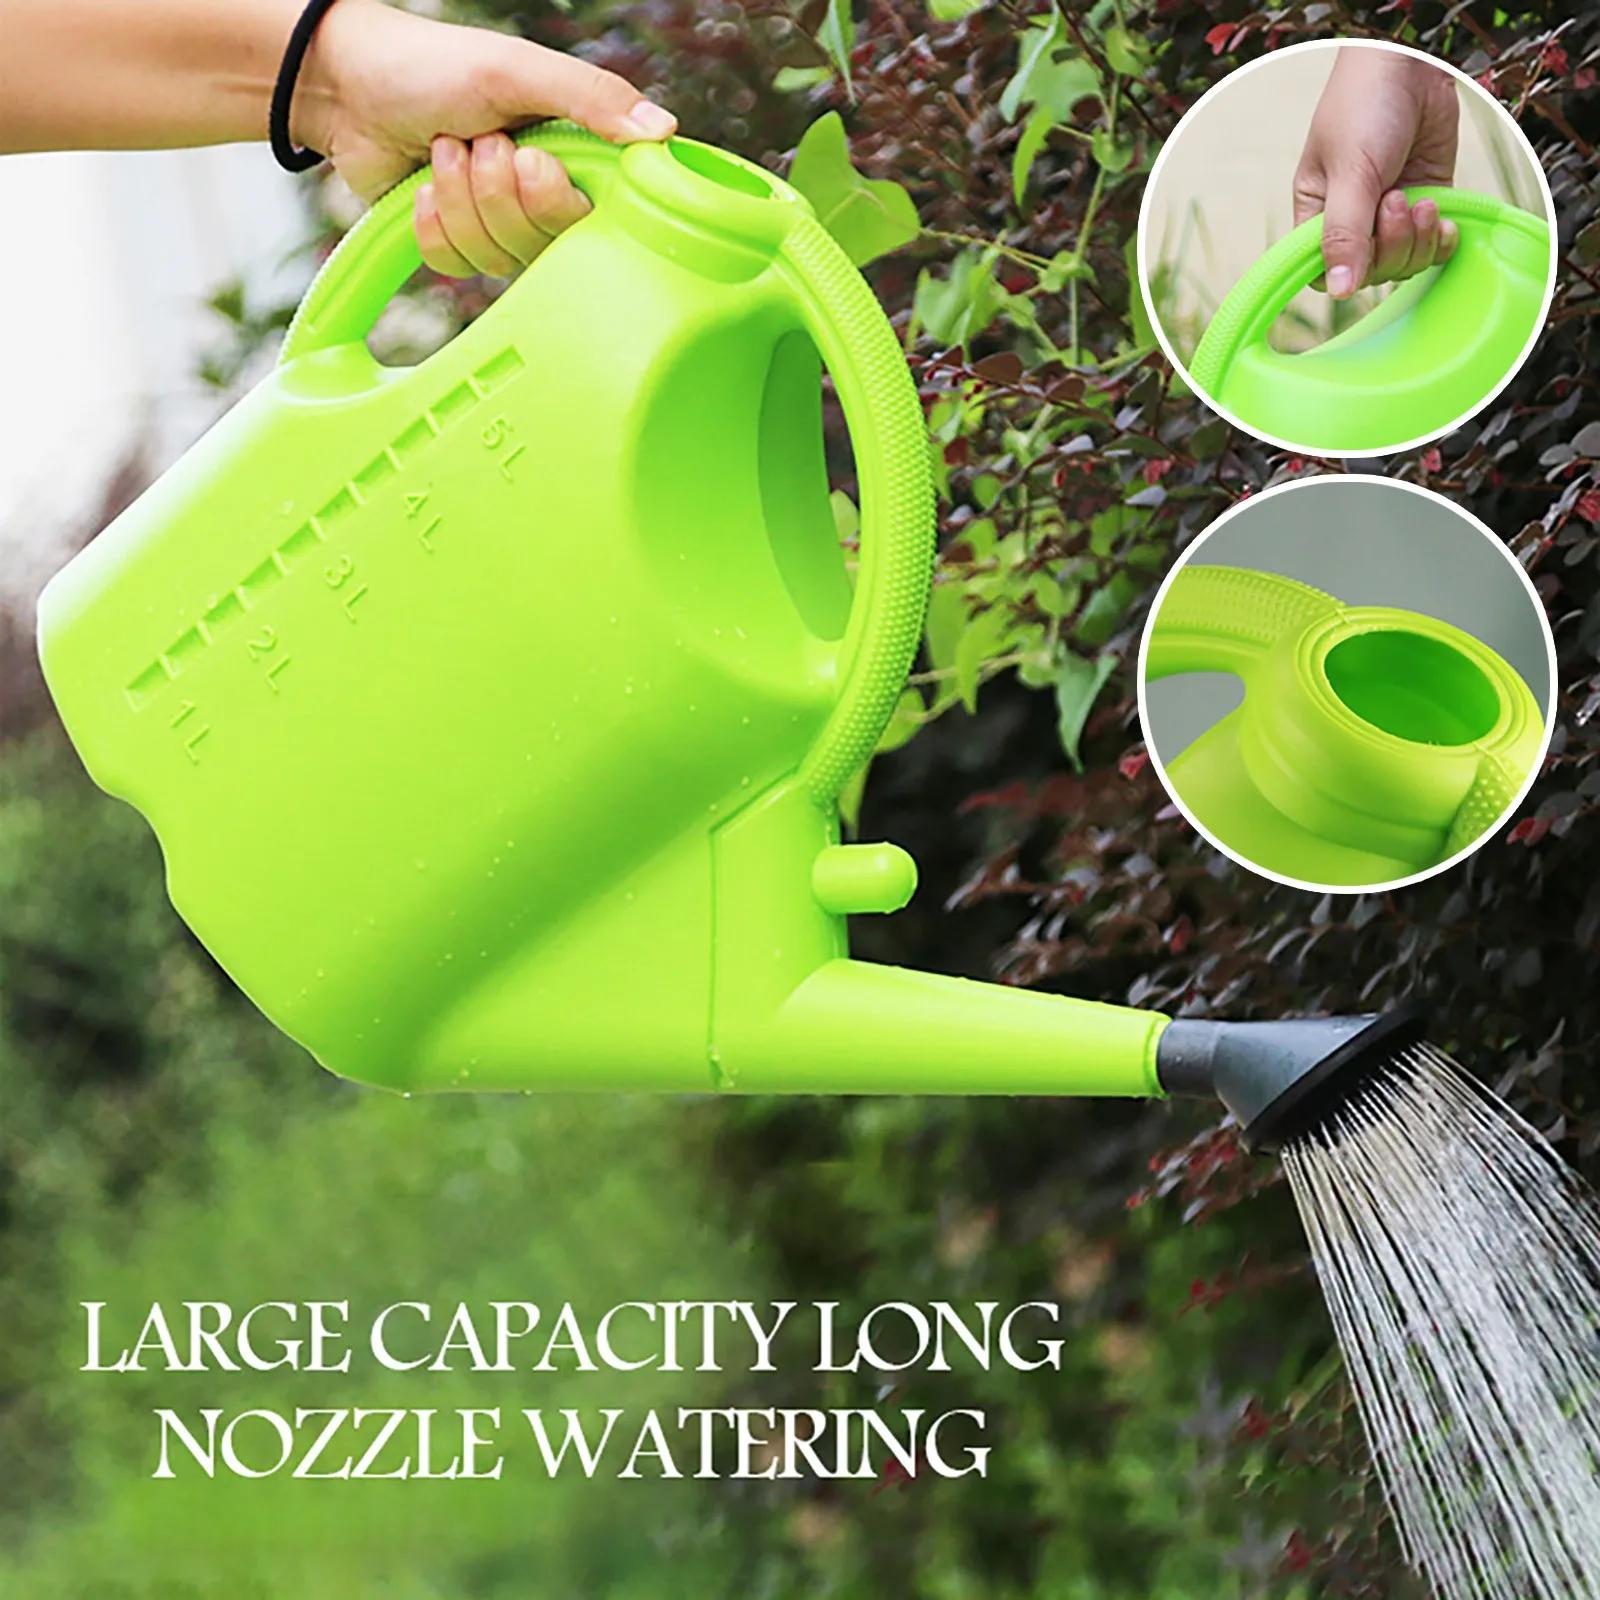 5L Watering Pot Detachable Watering Can Large Capacity Watering Can For Indoor Outdoor Garden For plants trees children's bath